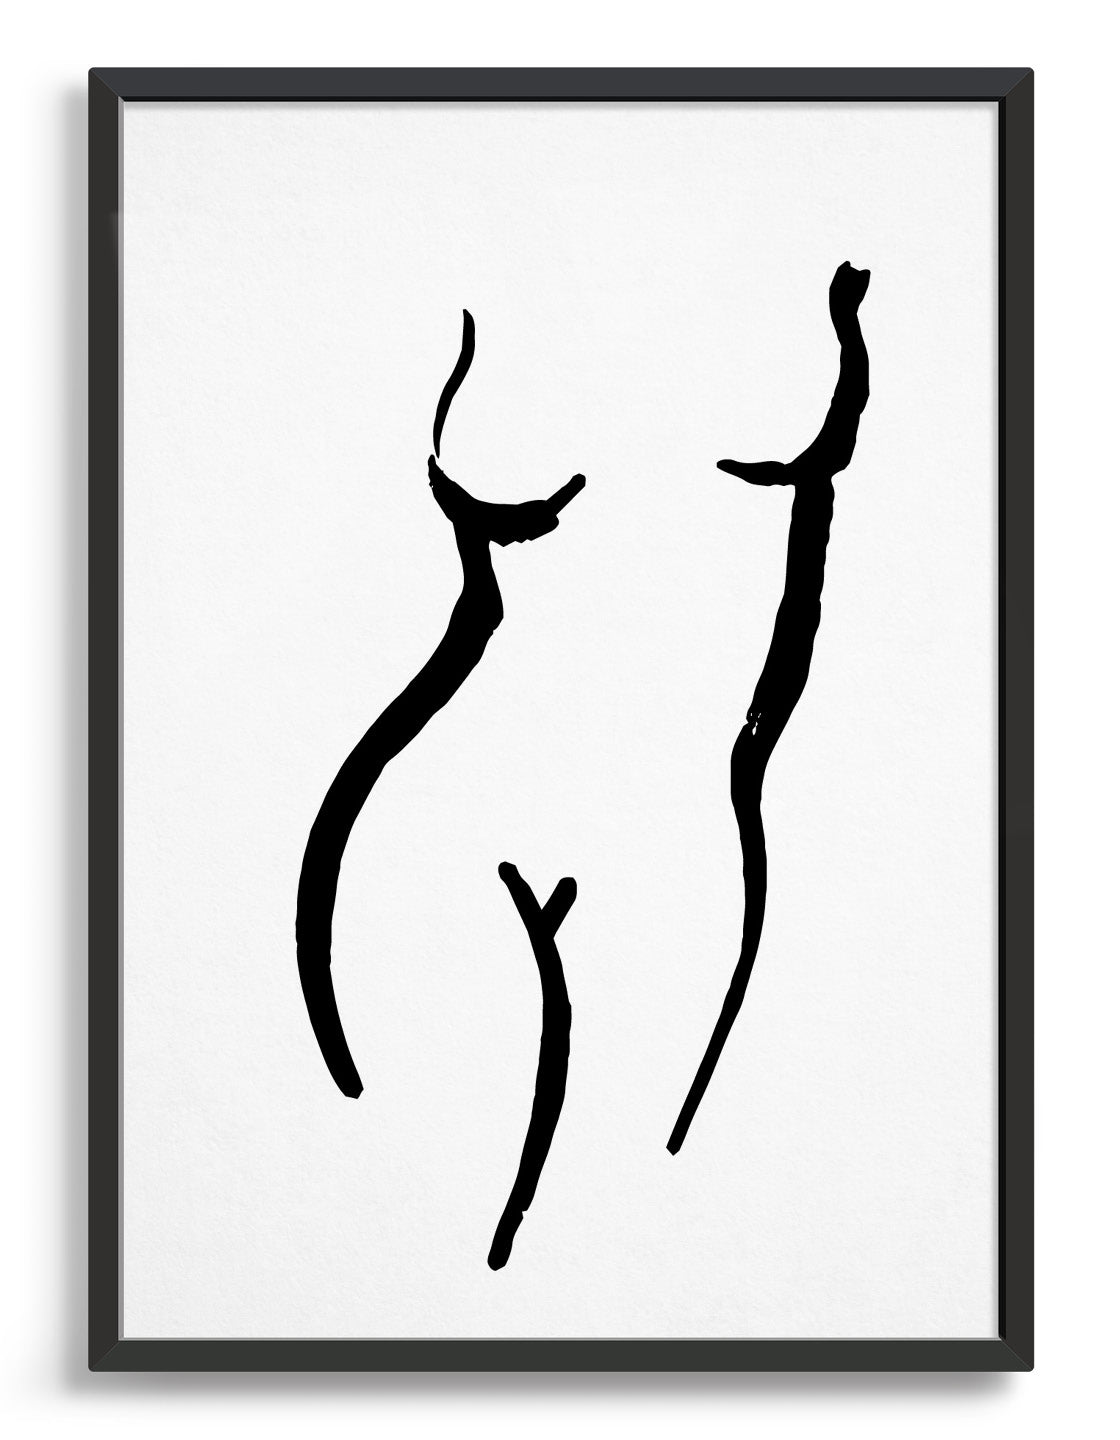 simple minimal black line drawing of a woman's torso against a white background